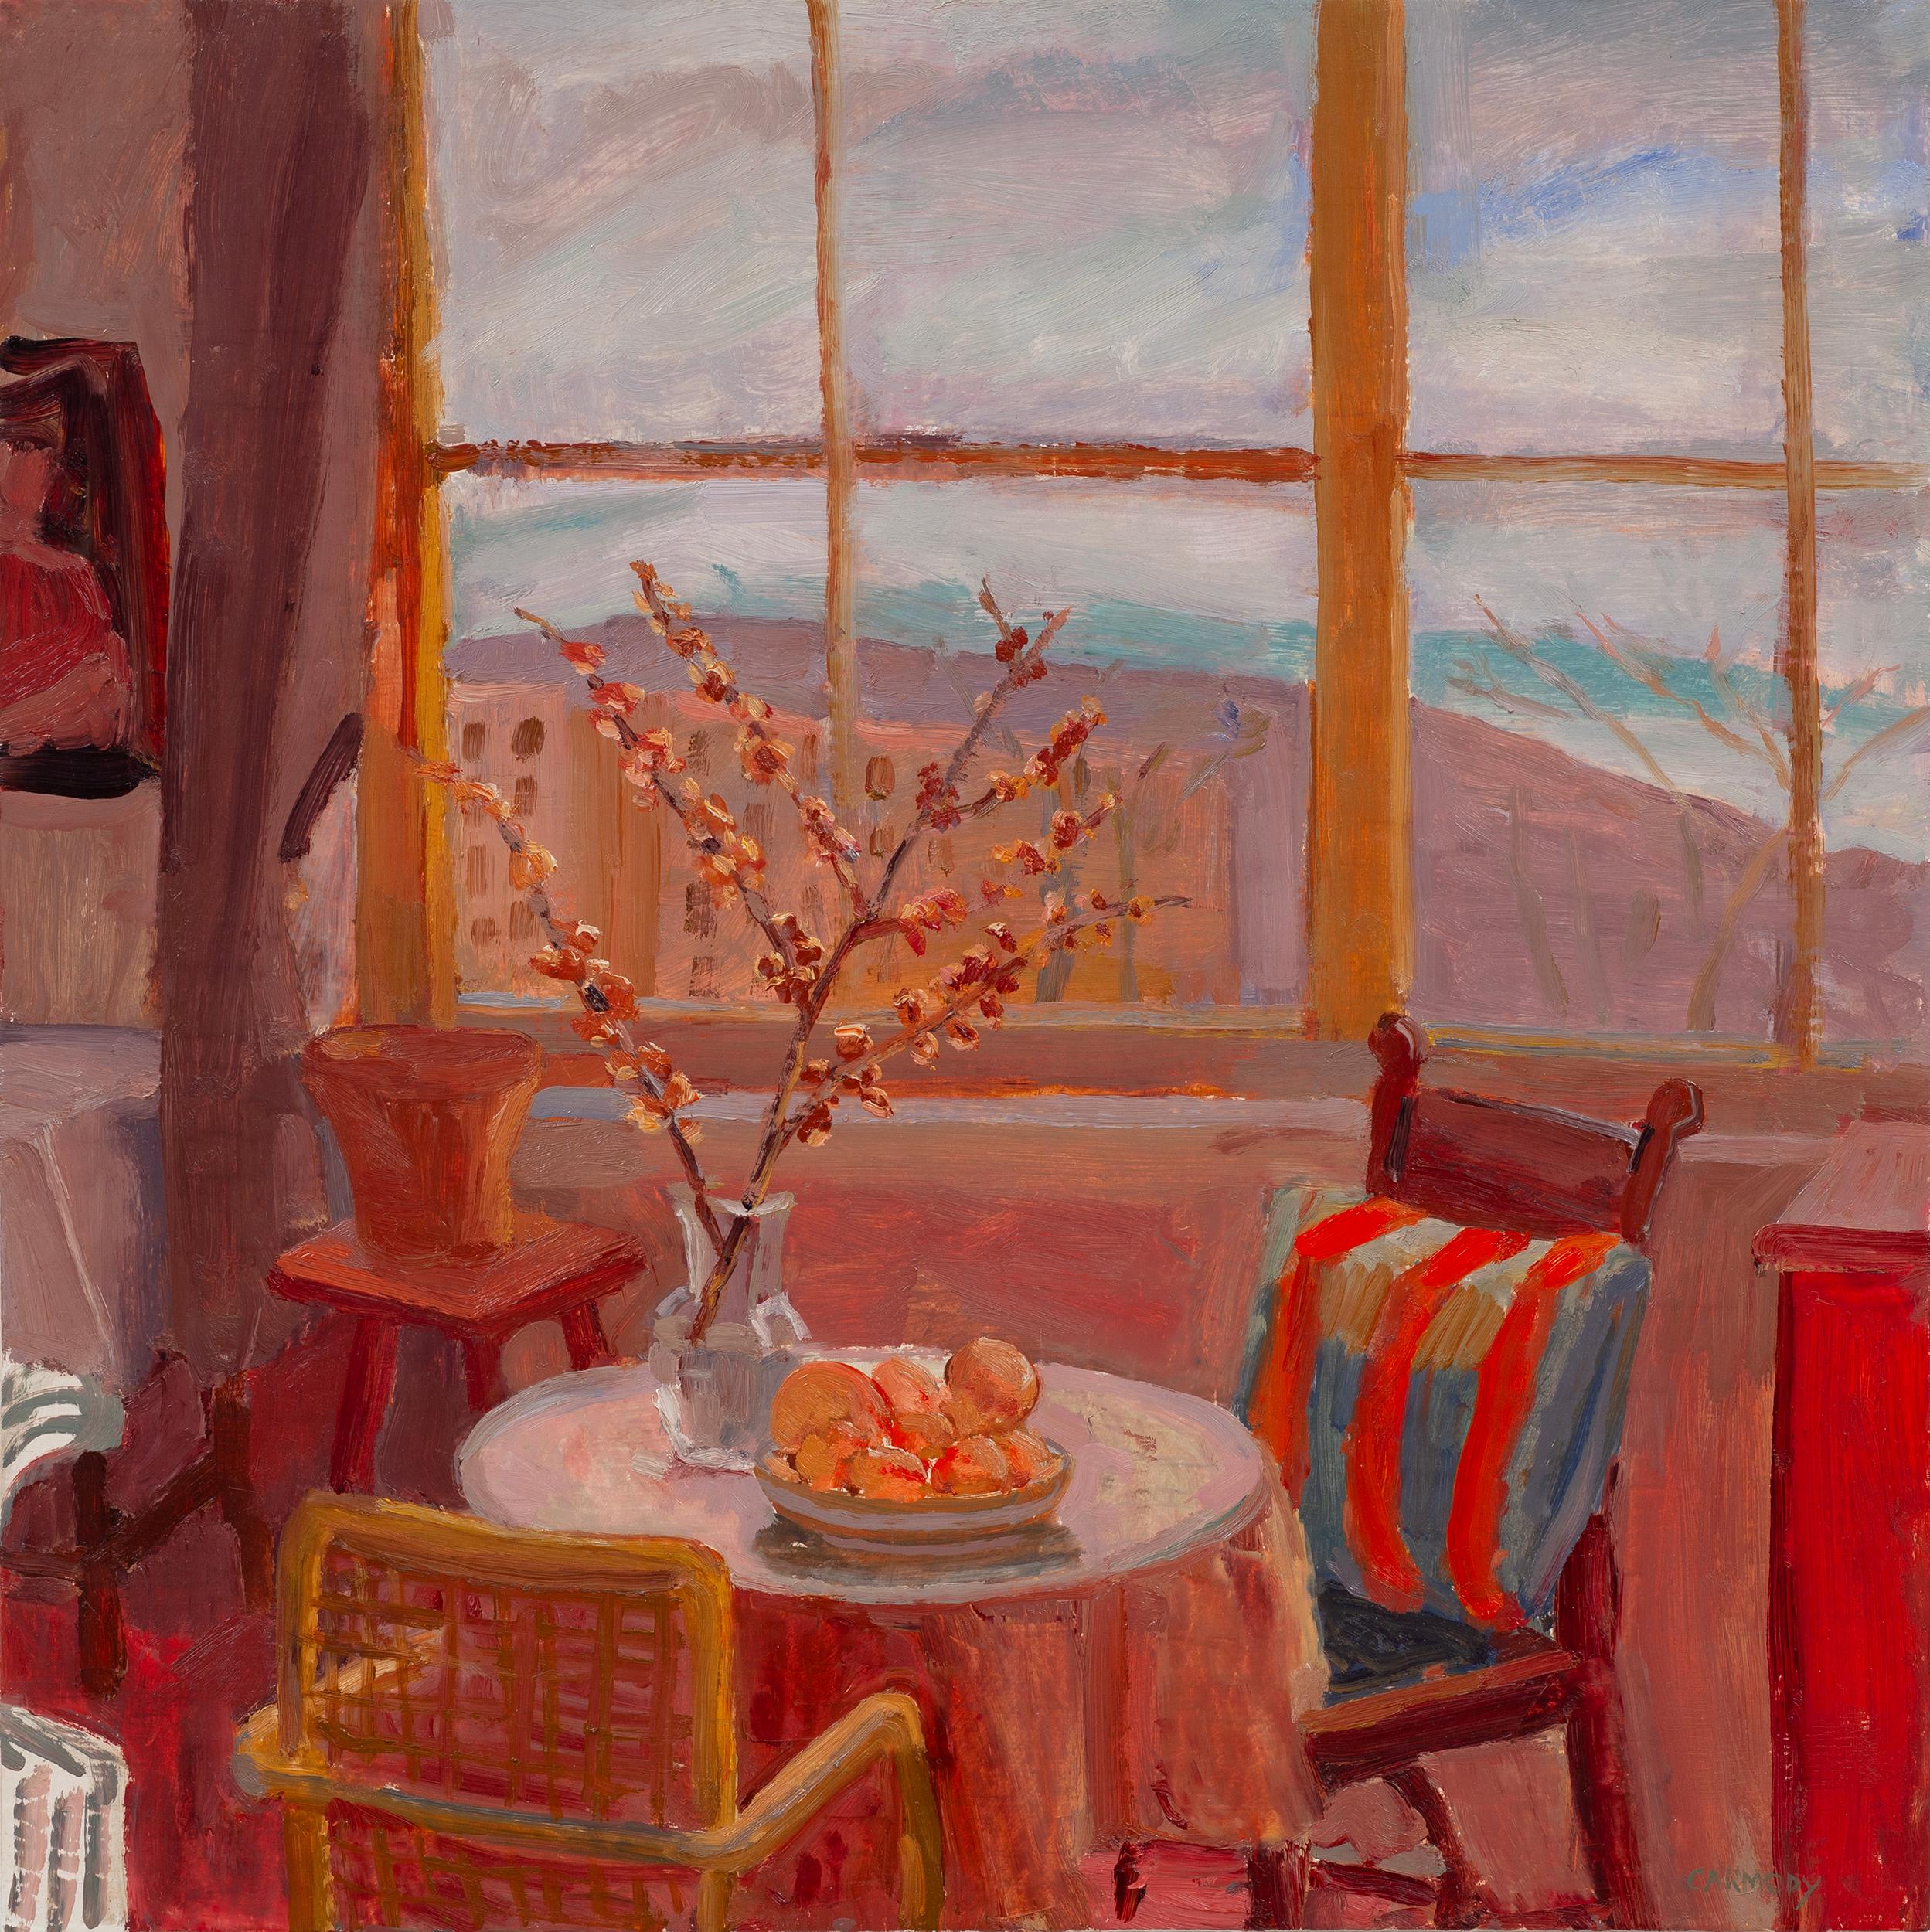 Kelly Carmody Still-Life Painting - "New Year's Interior" bright still life with a view in red and pink hues